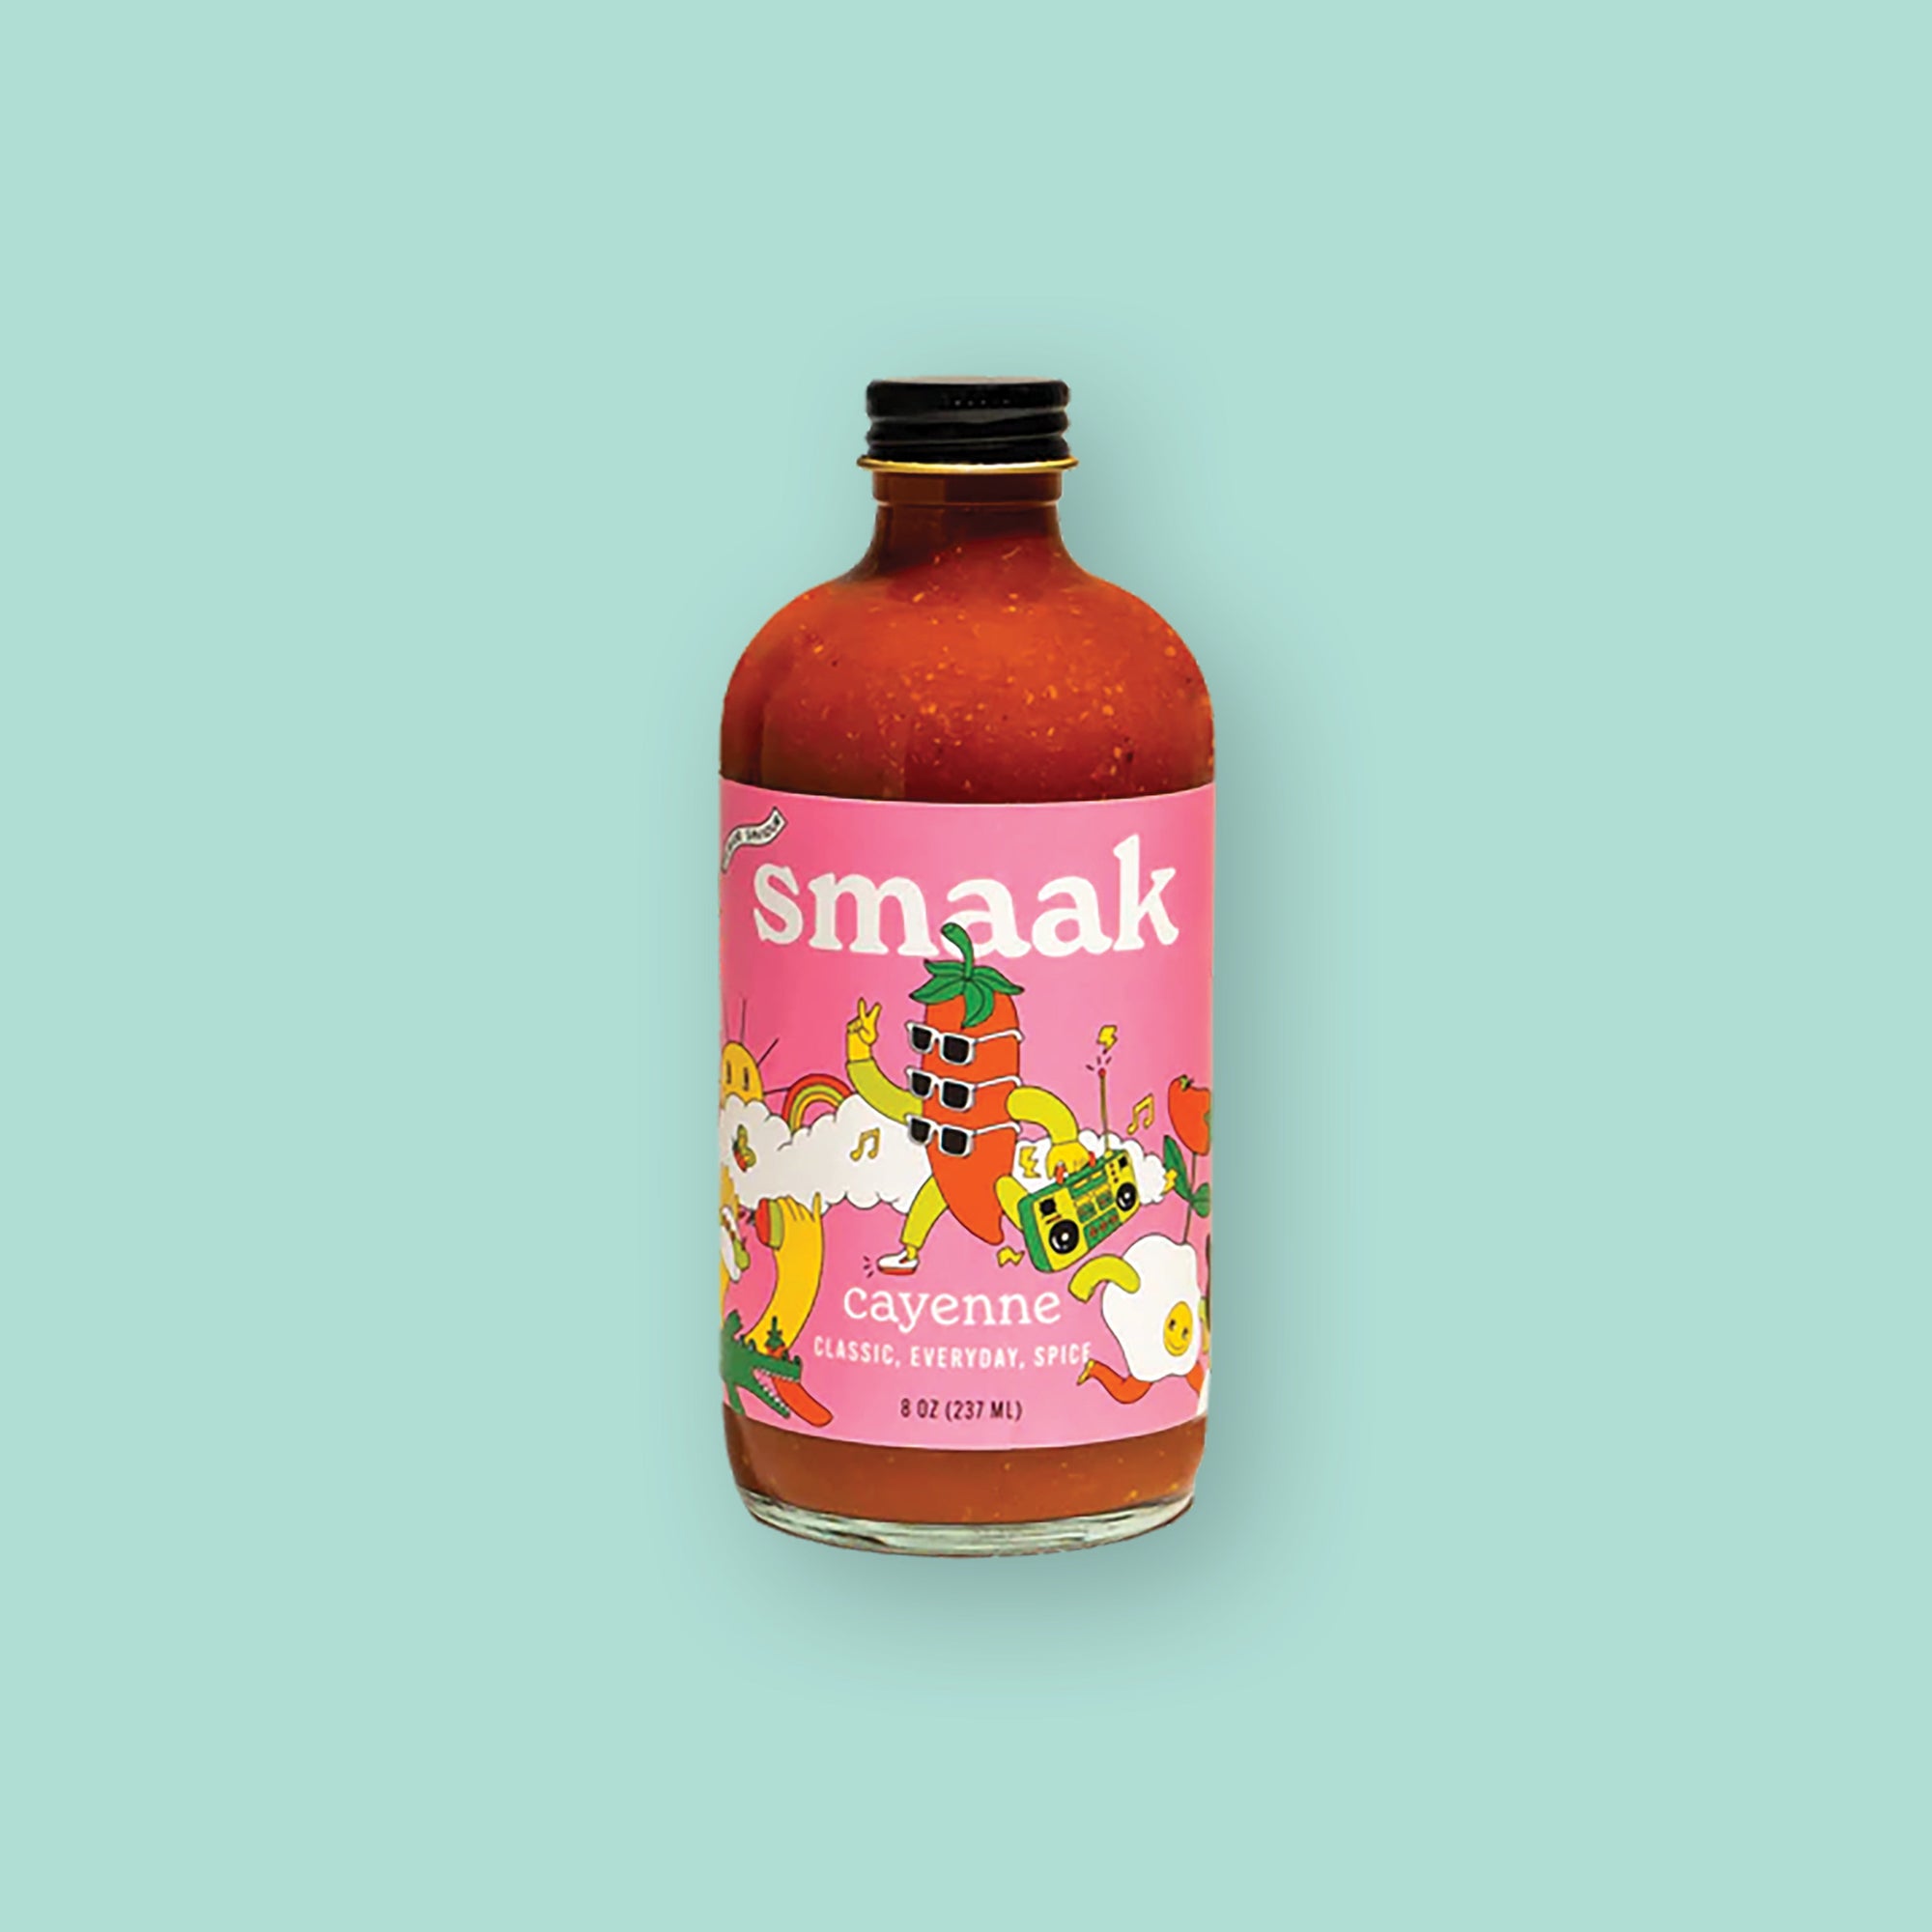 On a mint green background sits a jar. The clear jar has a black lid and a pink label. It is filled with reddith liquid mix. On the label is a colorful illustration of a jalapeno character with three sunglasses on and holding a radio. There are illustrations of clouds, sun, rainbow, musical notes and flowers. It says "smaak" in white, thick serif font. It also says "cayenne" in white, thick serif font and under that it says "CLASSIC, EVERYDAY, SPICE" in white, all caps block font. 8 oz (237 ml)